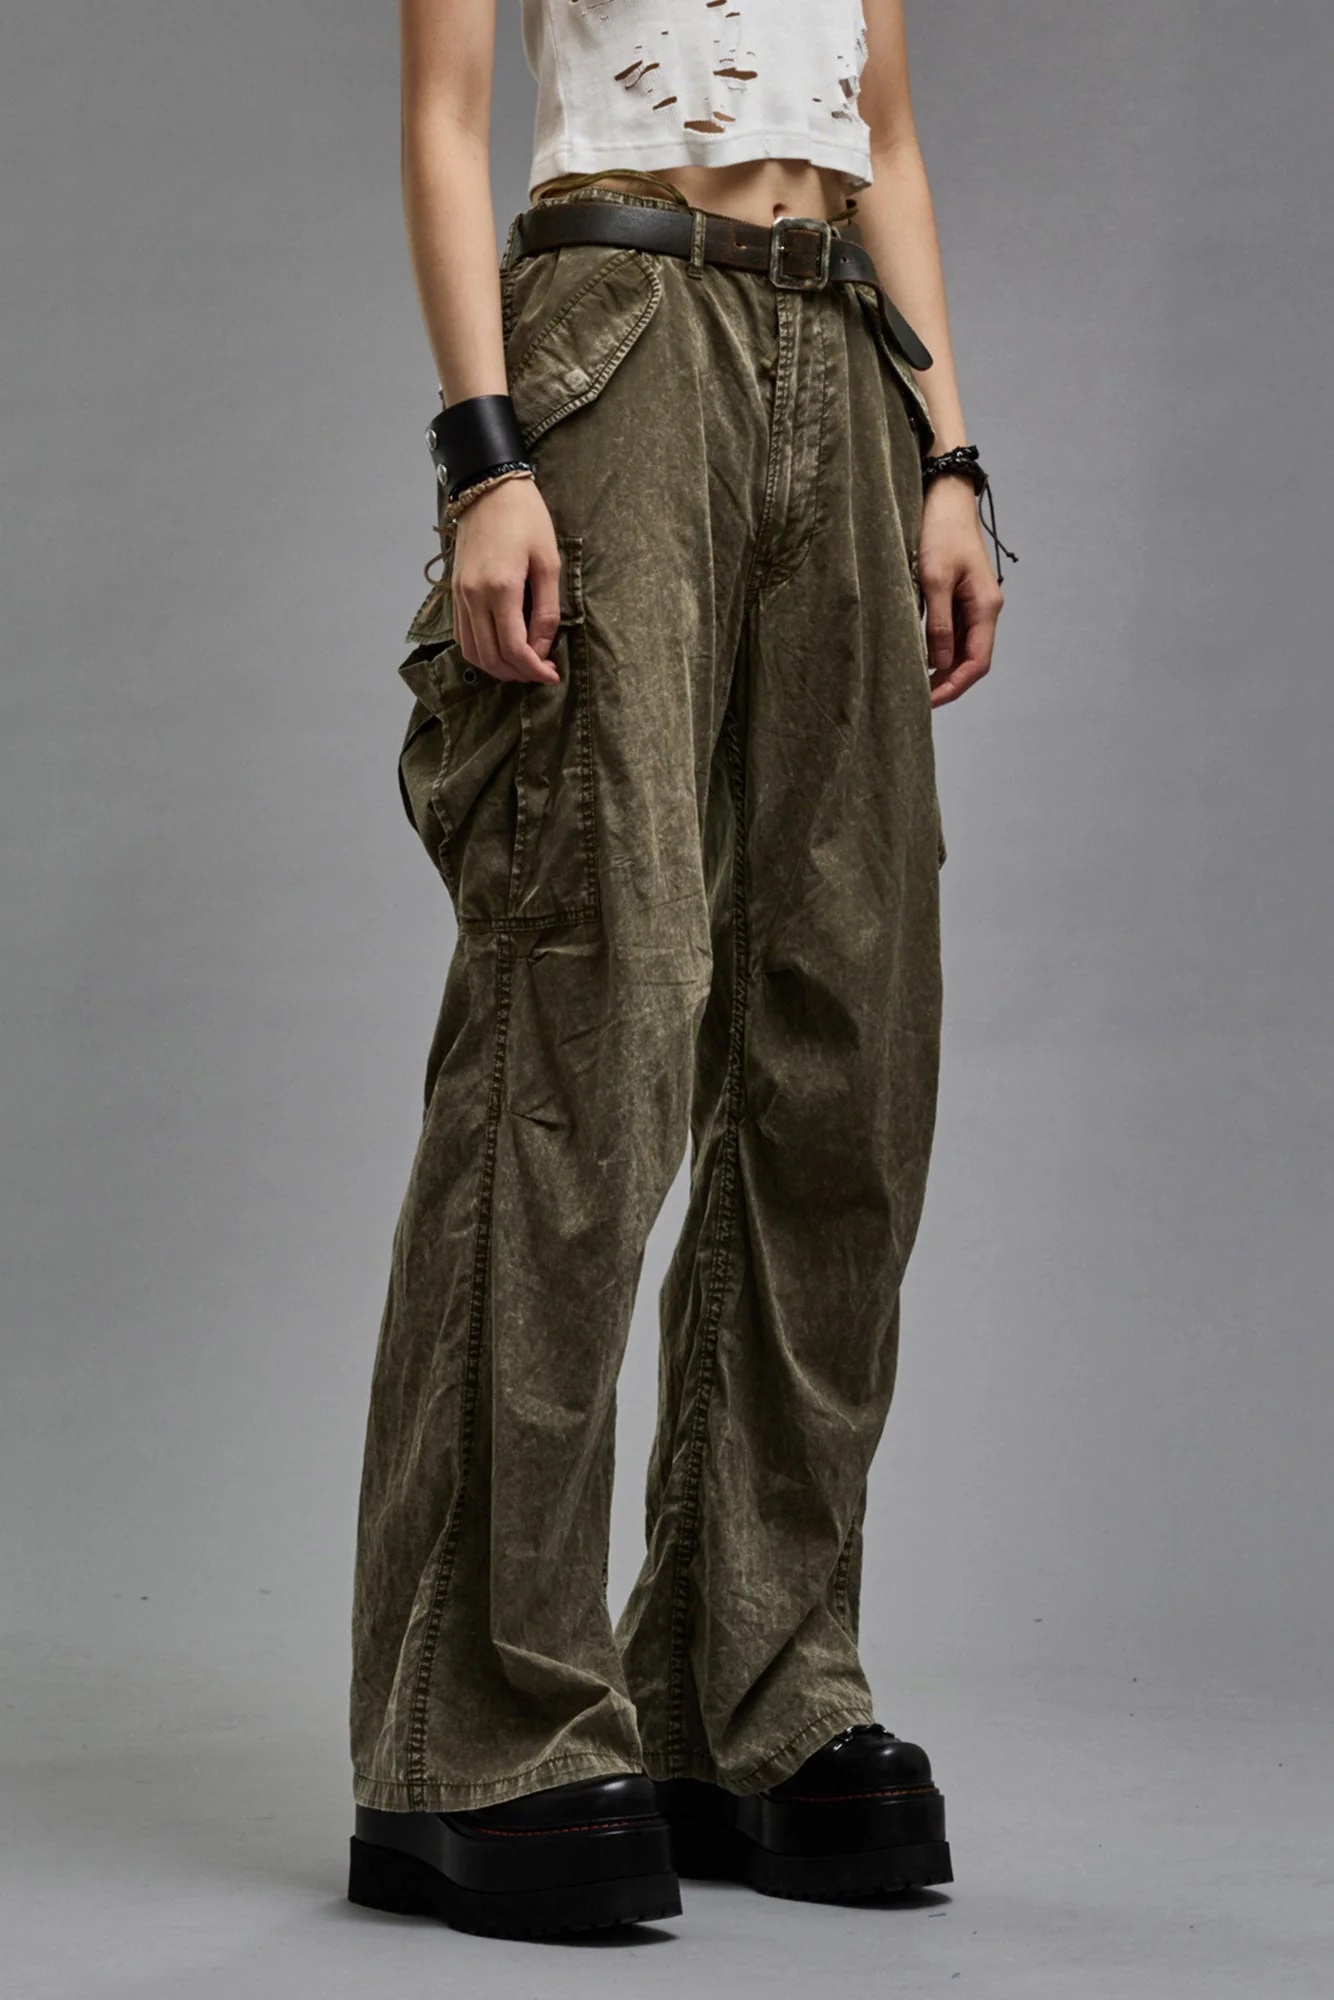 R13 Wide Leg Cargo Pant in Washed Olive 26